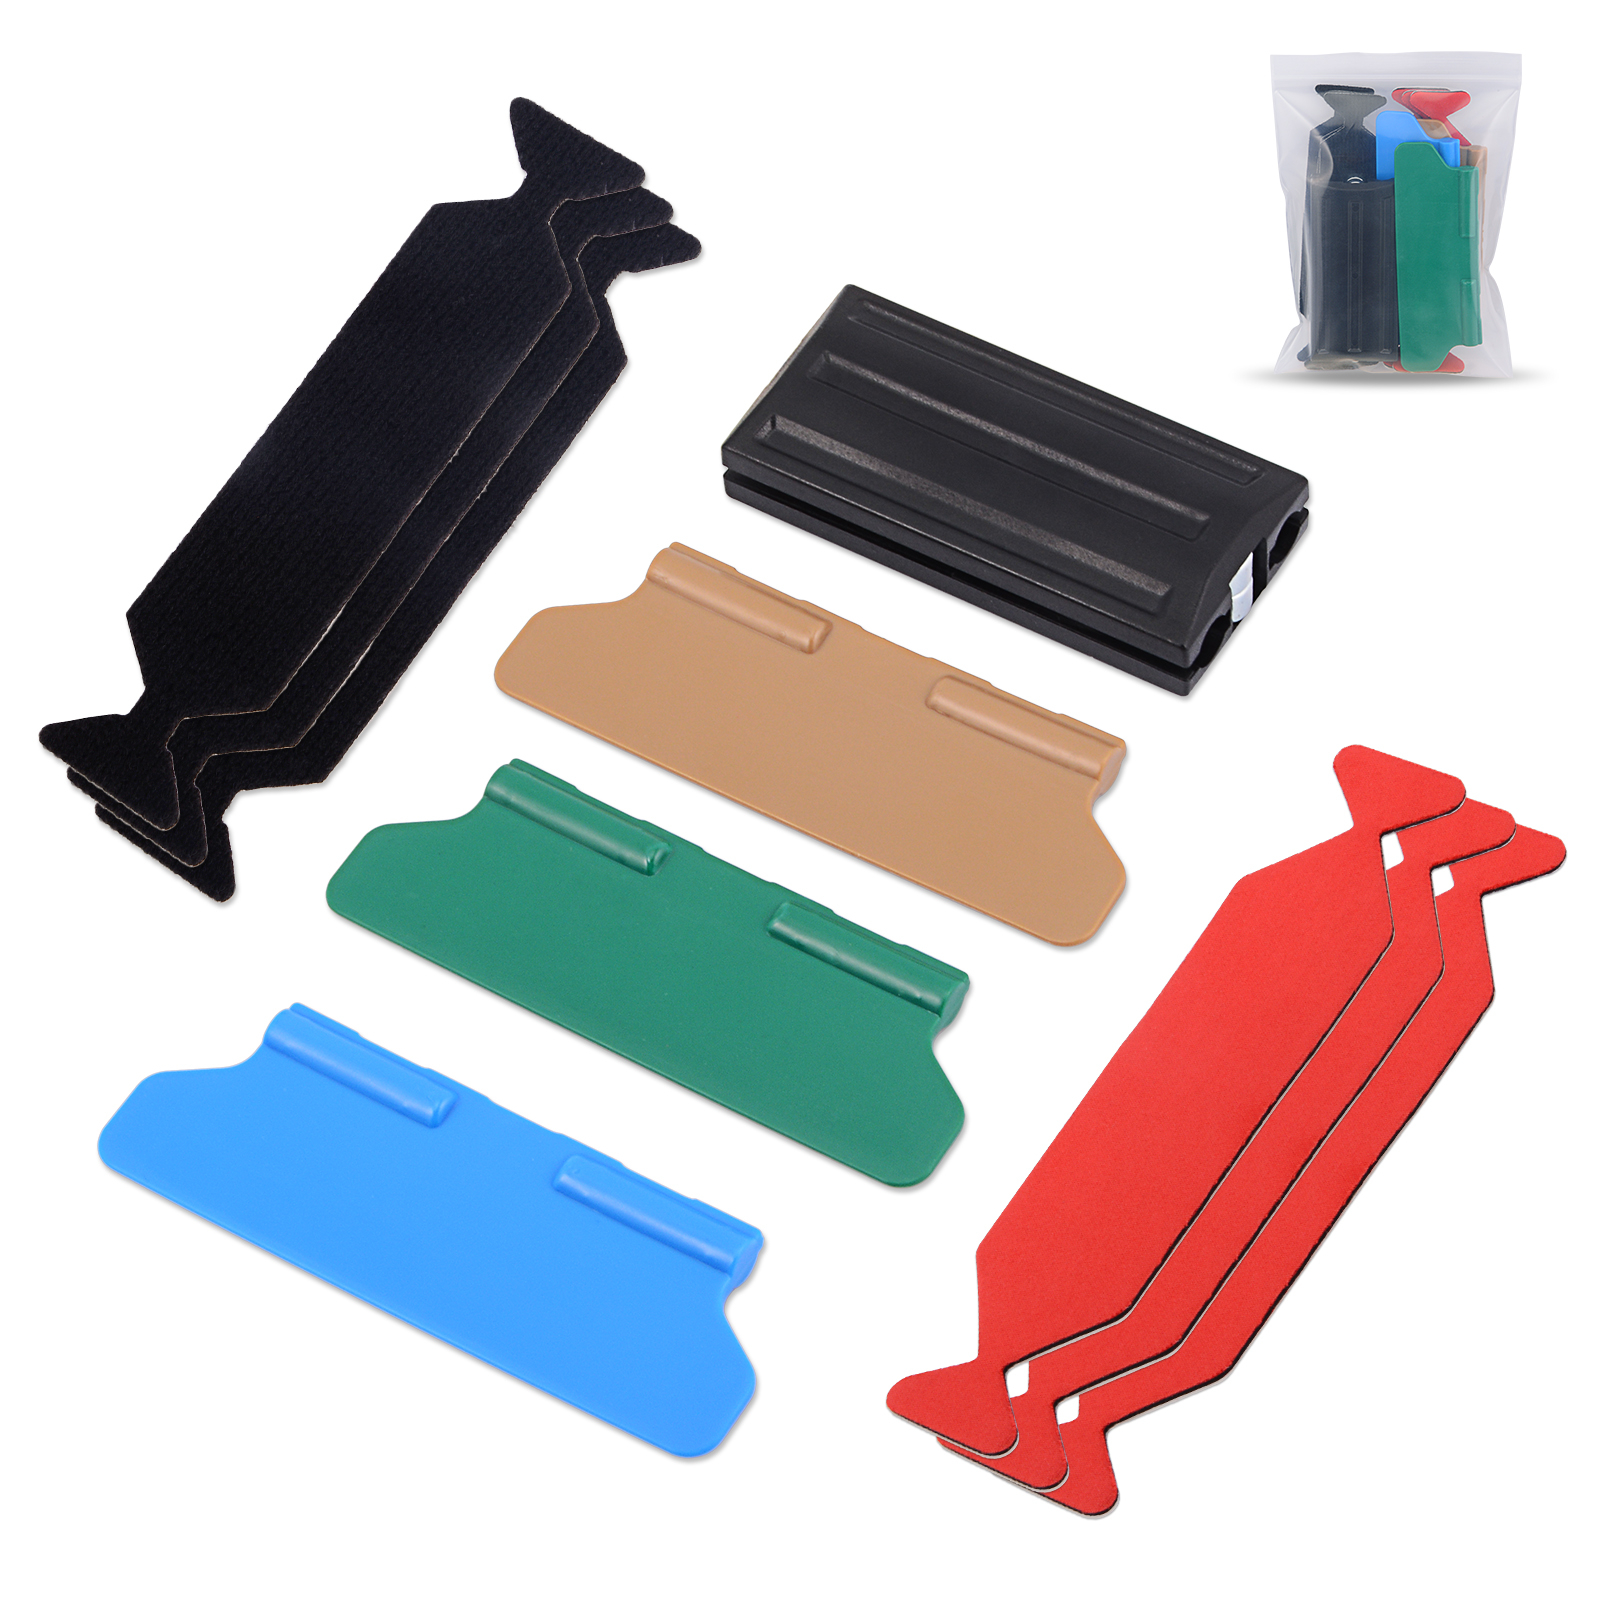 4'' x 1-1/3'', 3 in 1 Small Magnetic Squeegee Kit with 6 pcs of Felt and 3 Hardness (48 / 63 / 72 Degreee Shores)